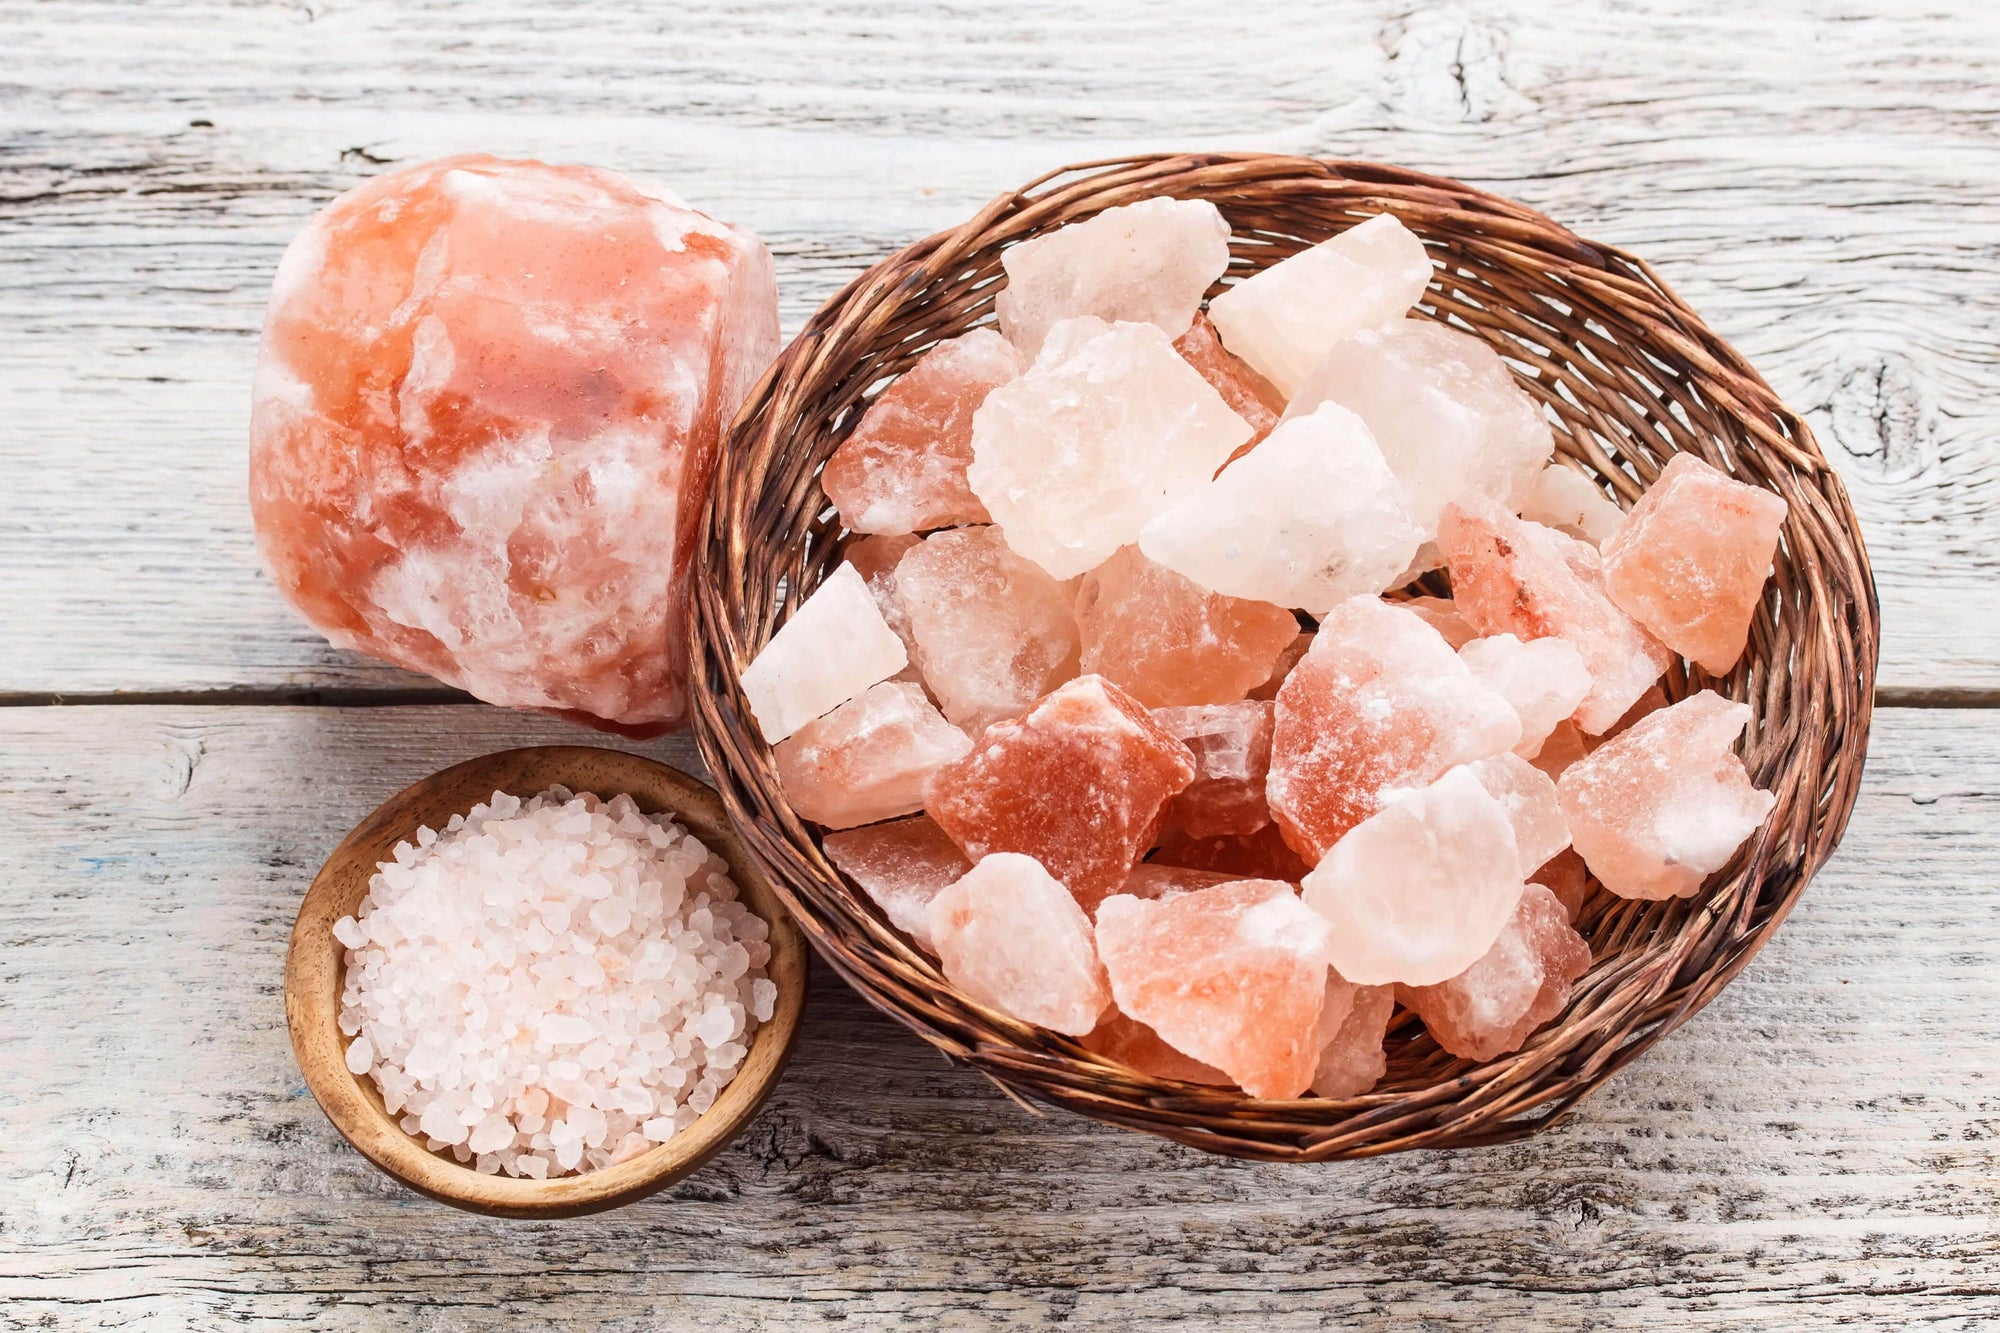 Himalayan pink salt is well-known worldwide, because of its uses and benefits. It is used not only in food to impart a richer salty flavor but also used in medical and beauty treatments.